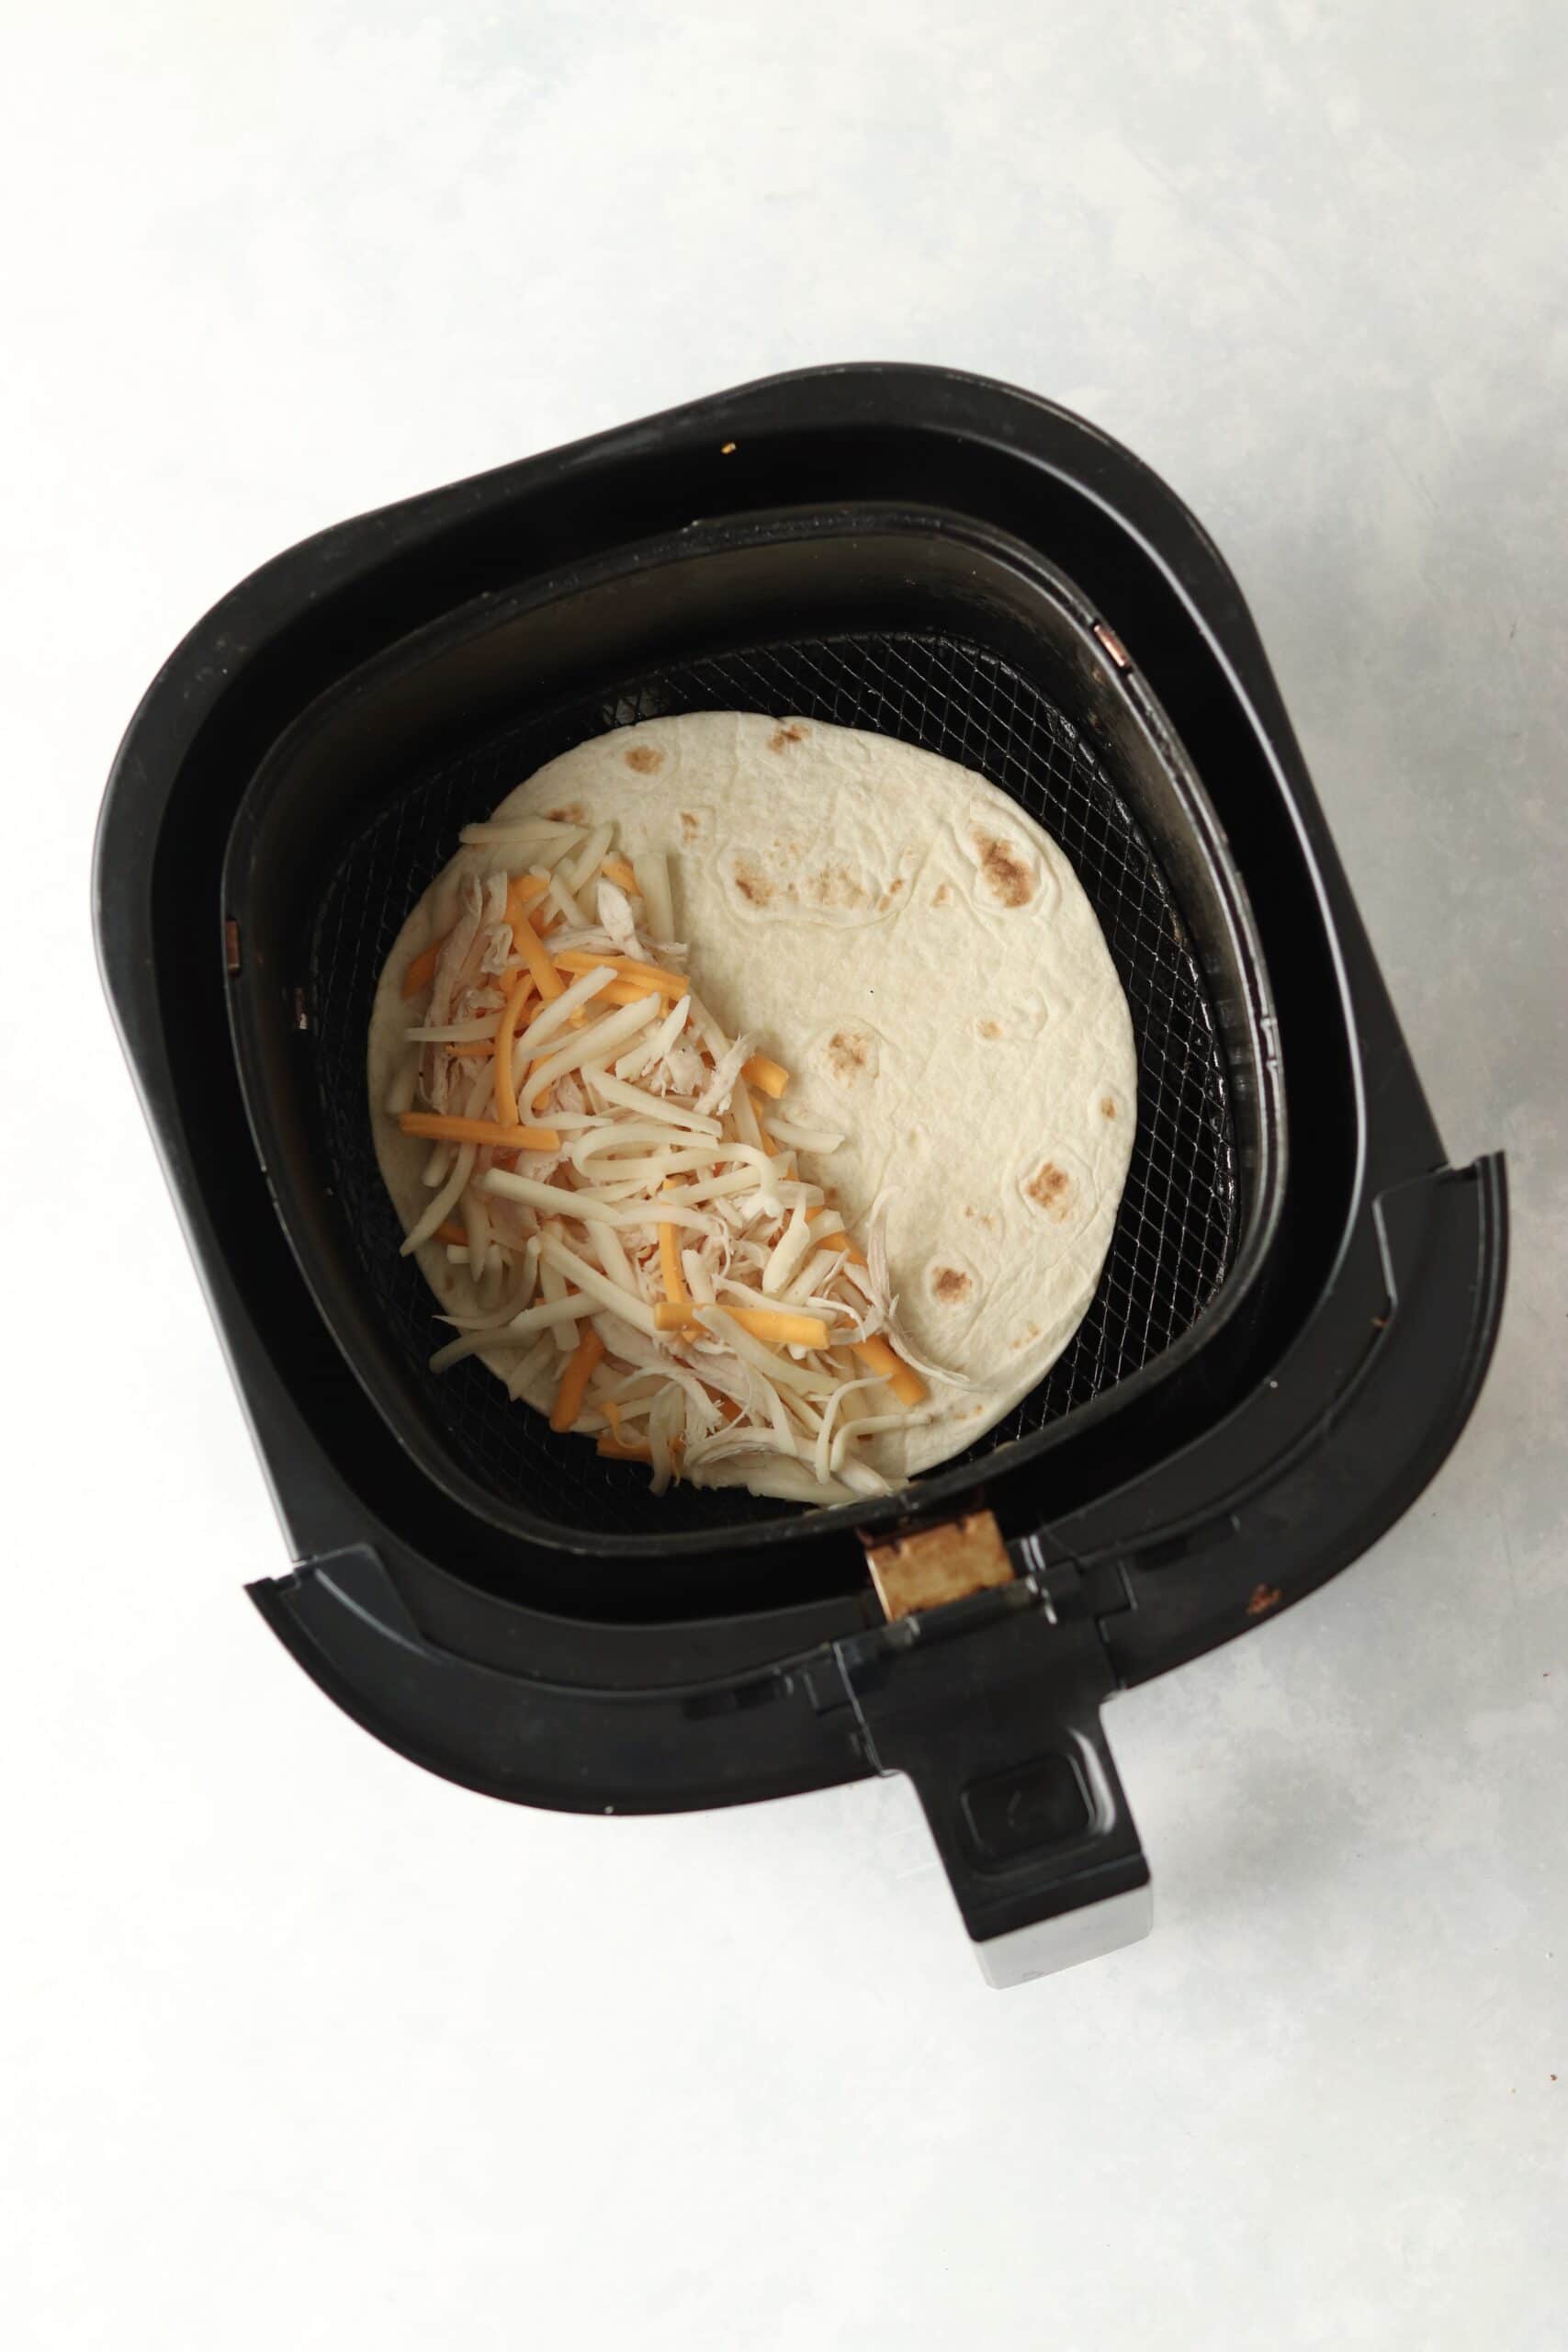 tortilla with shredded cheese